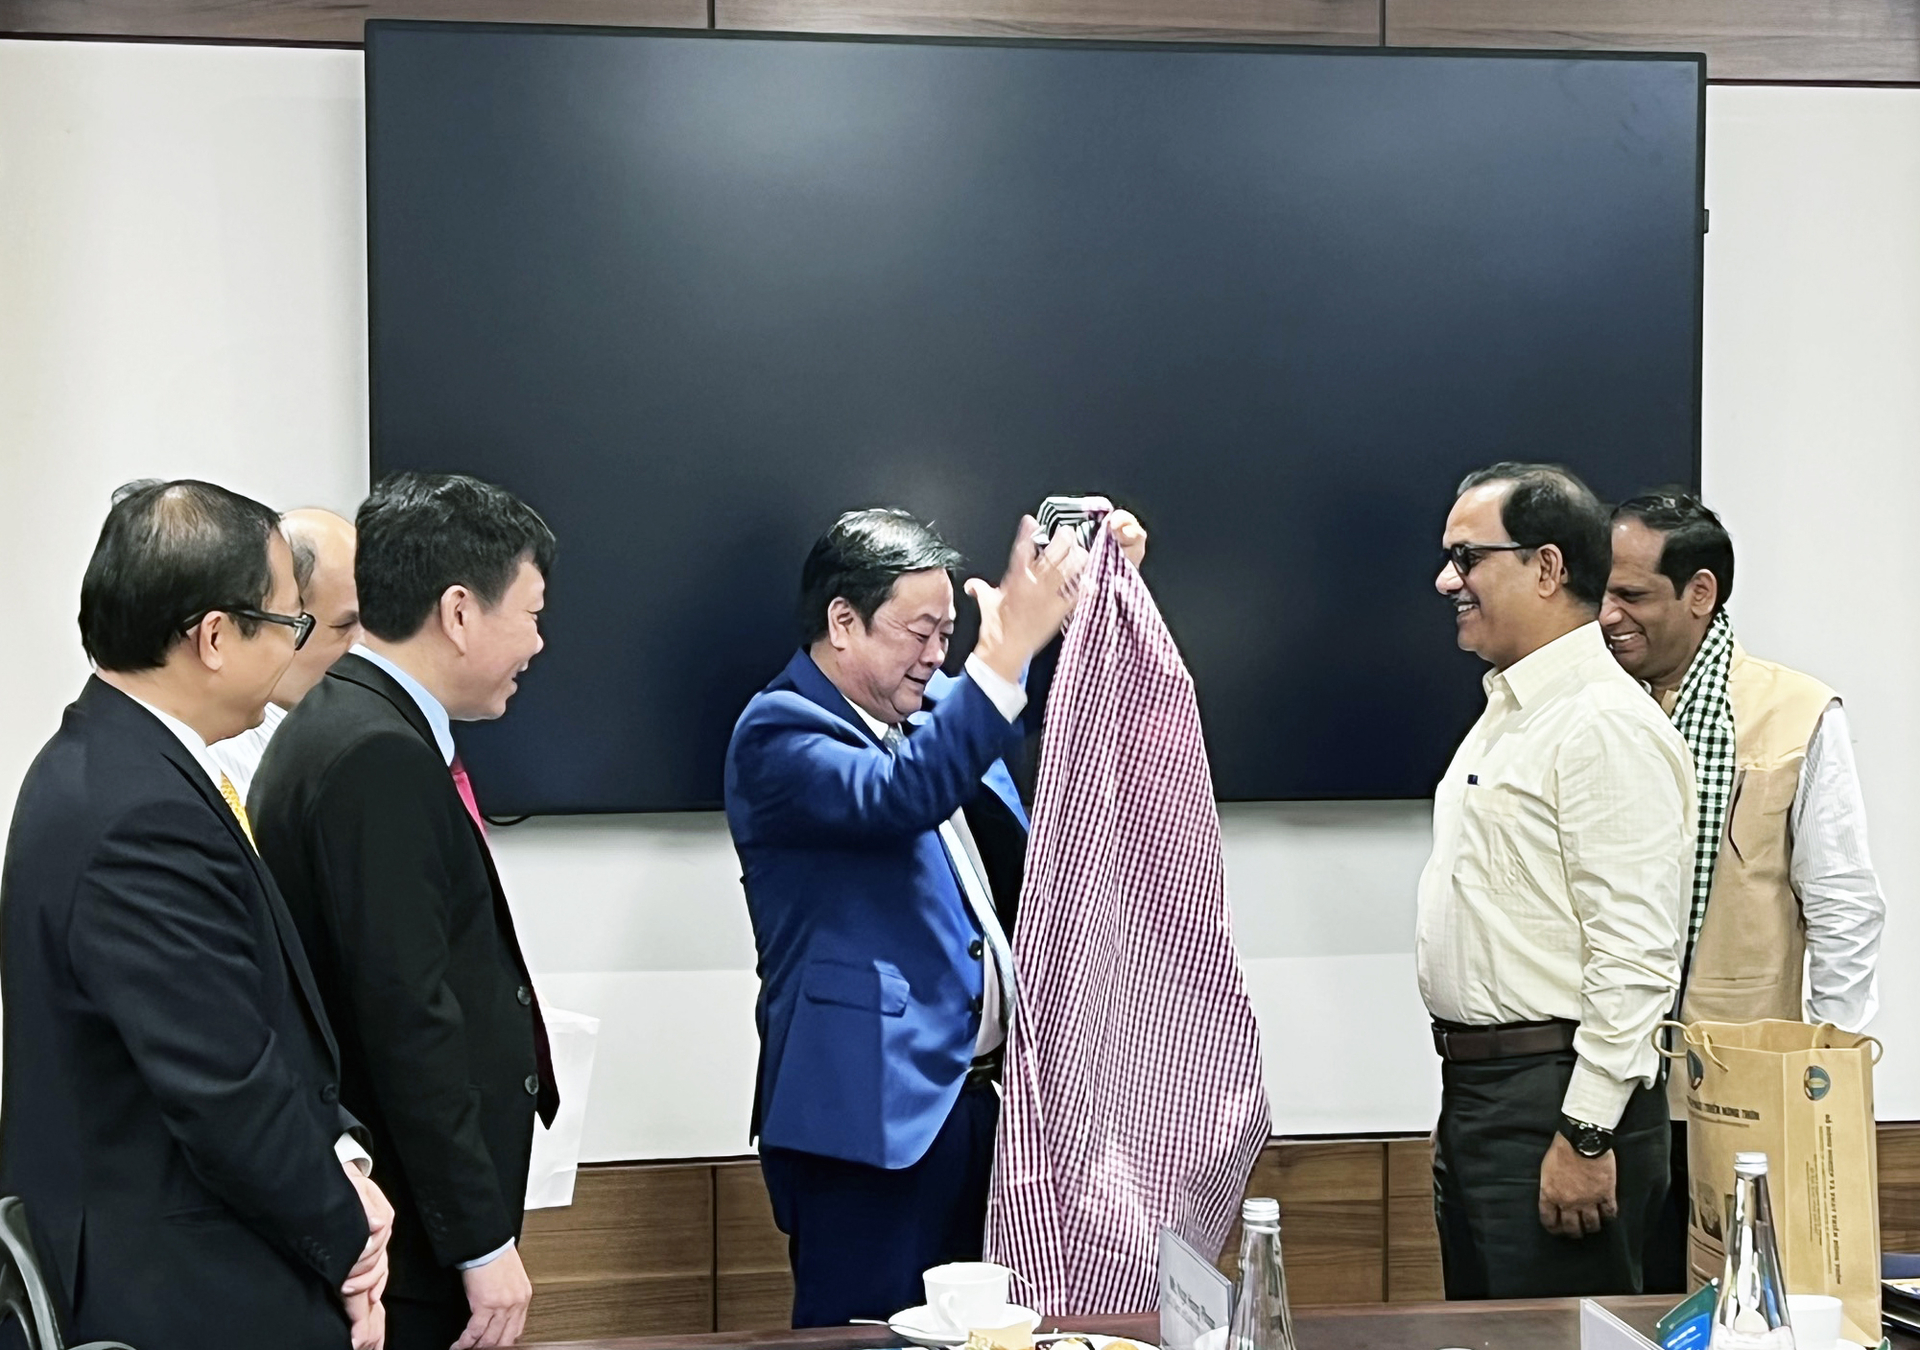 Minister Le Minh Hoan presents gifts to the leaders of the Indian Council of Agricultural Research (ICAR).